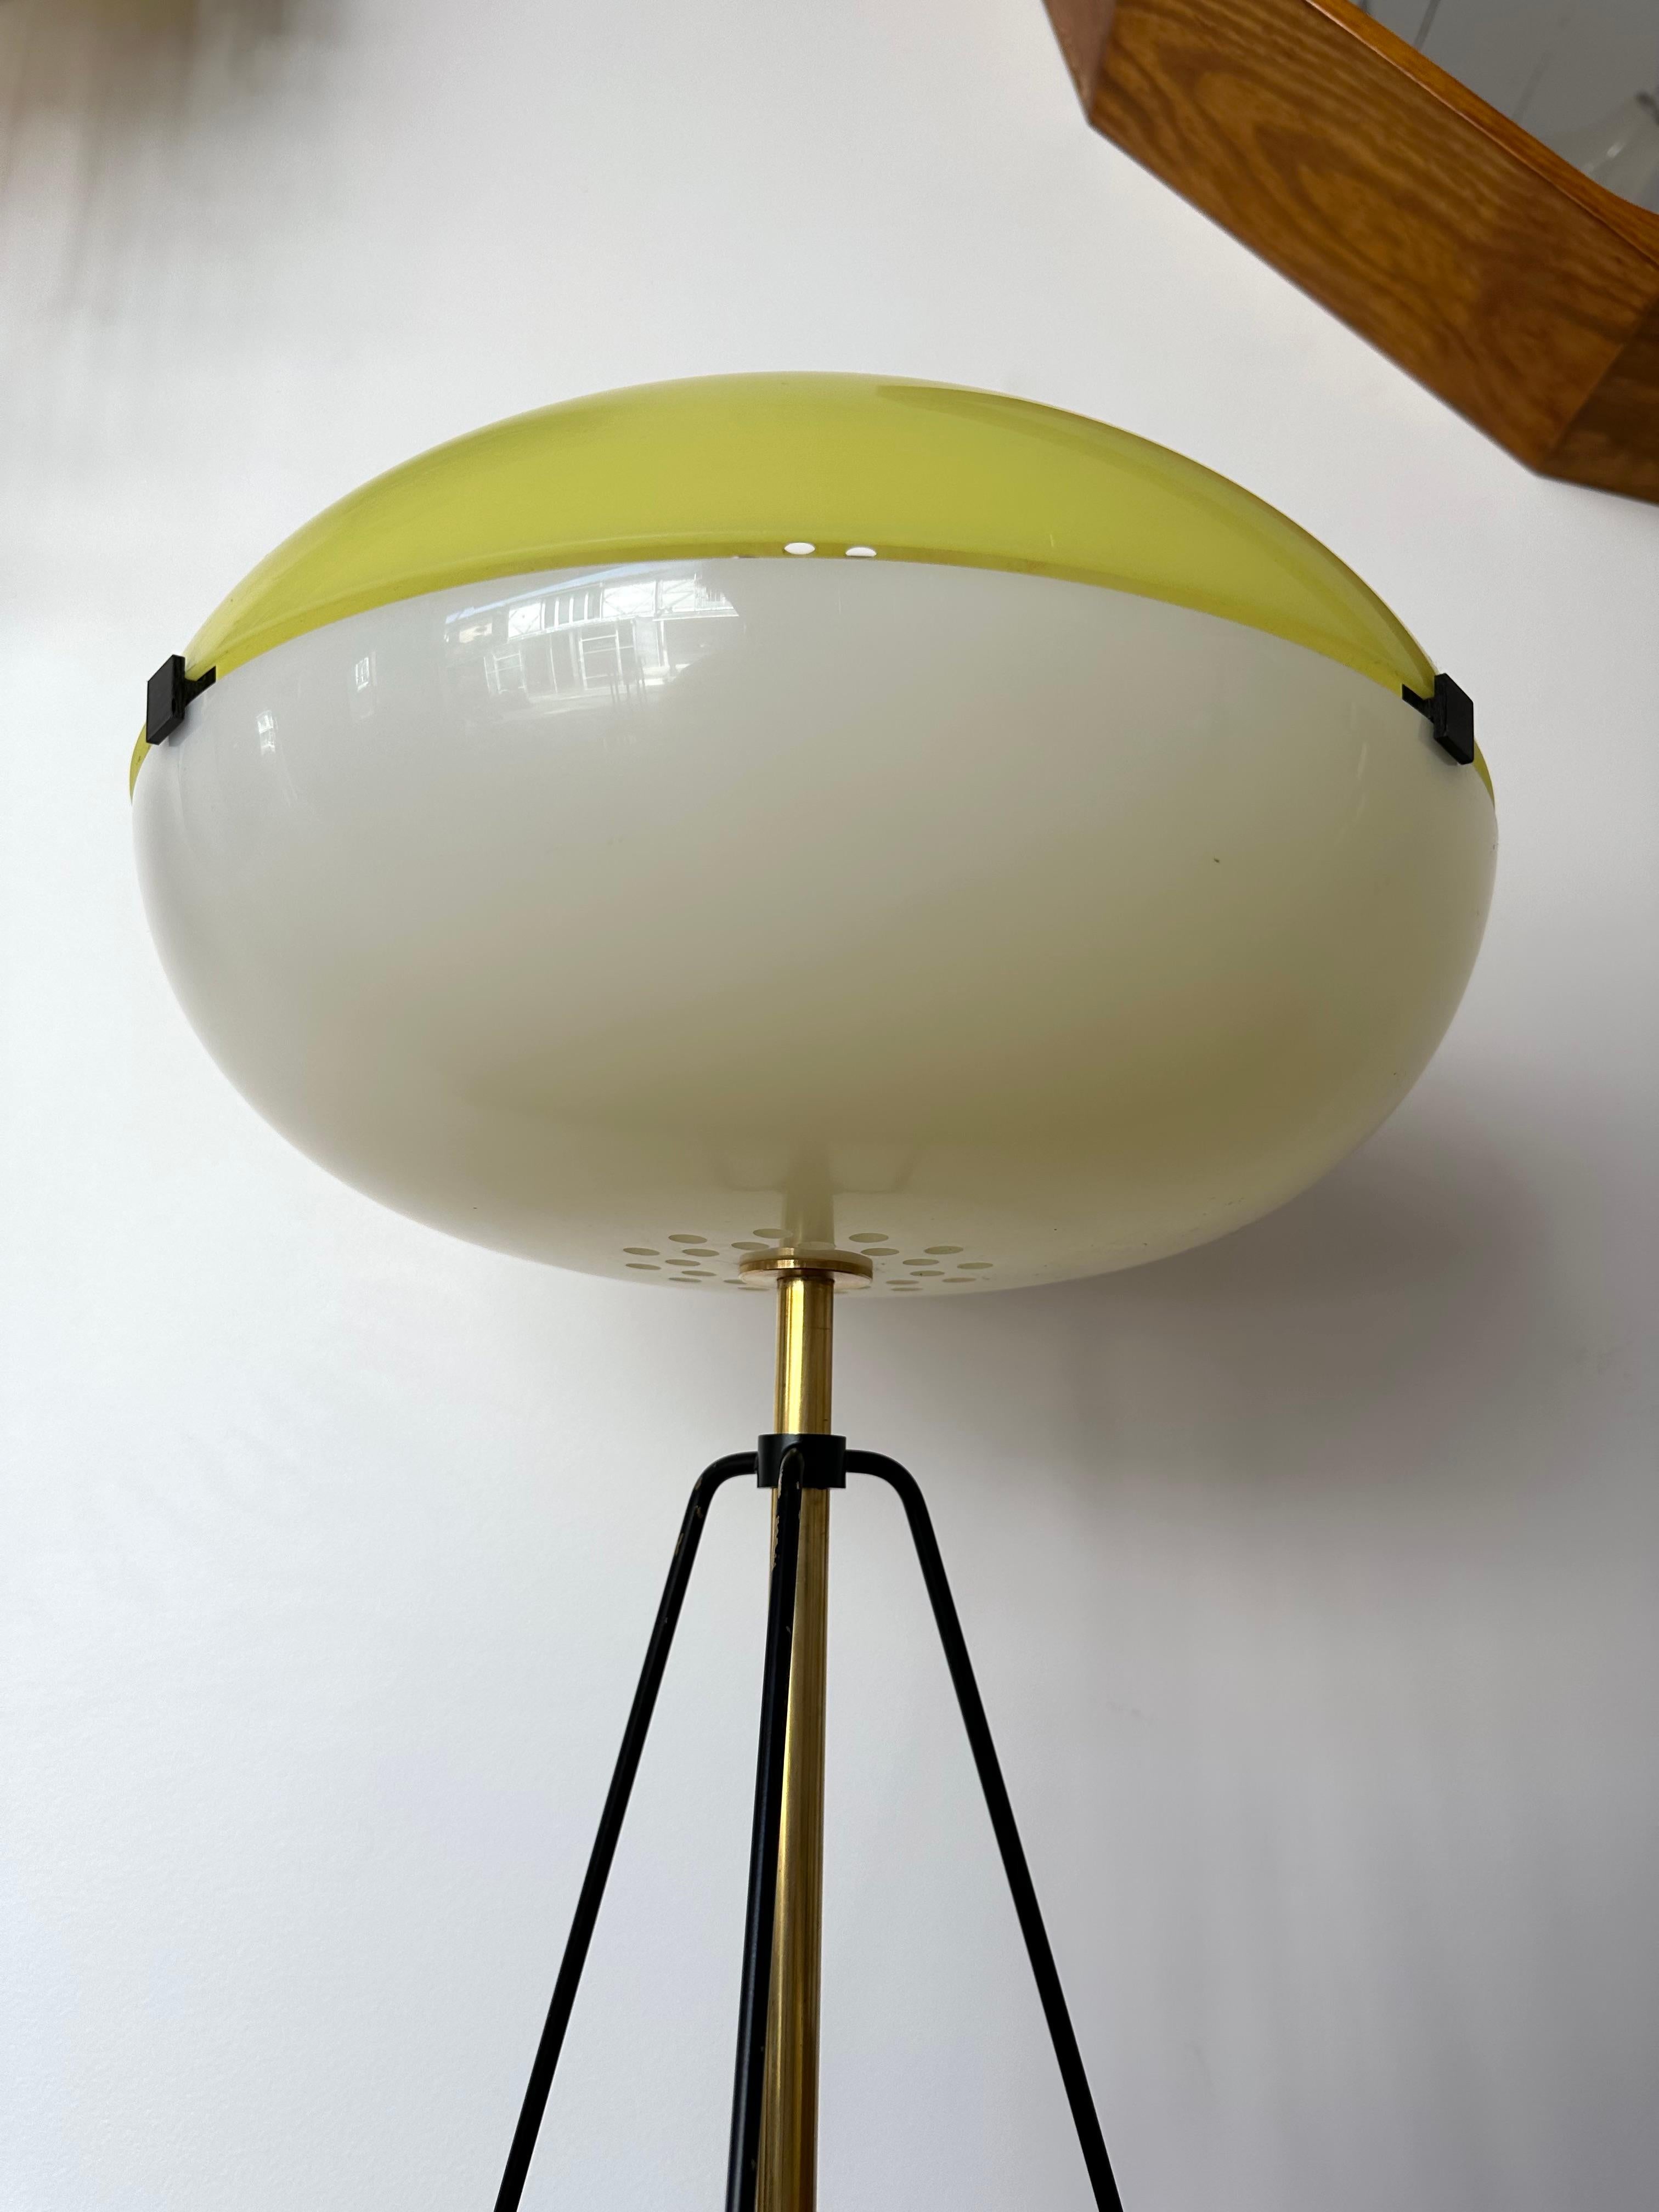 Very Rare Mid-Century Modern table lamp in brass, black lacquered metal, white and yellow methacrylate plastic resin lucite shades, brass adjustable arm. Original Stilnovo stamp inside the shade. Famous design like Reggiani, Sciolari, Francesco